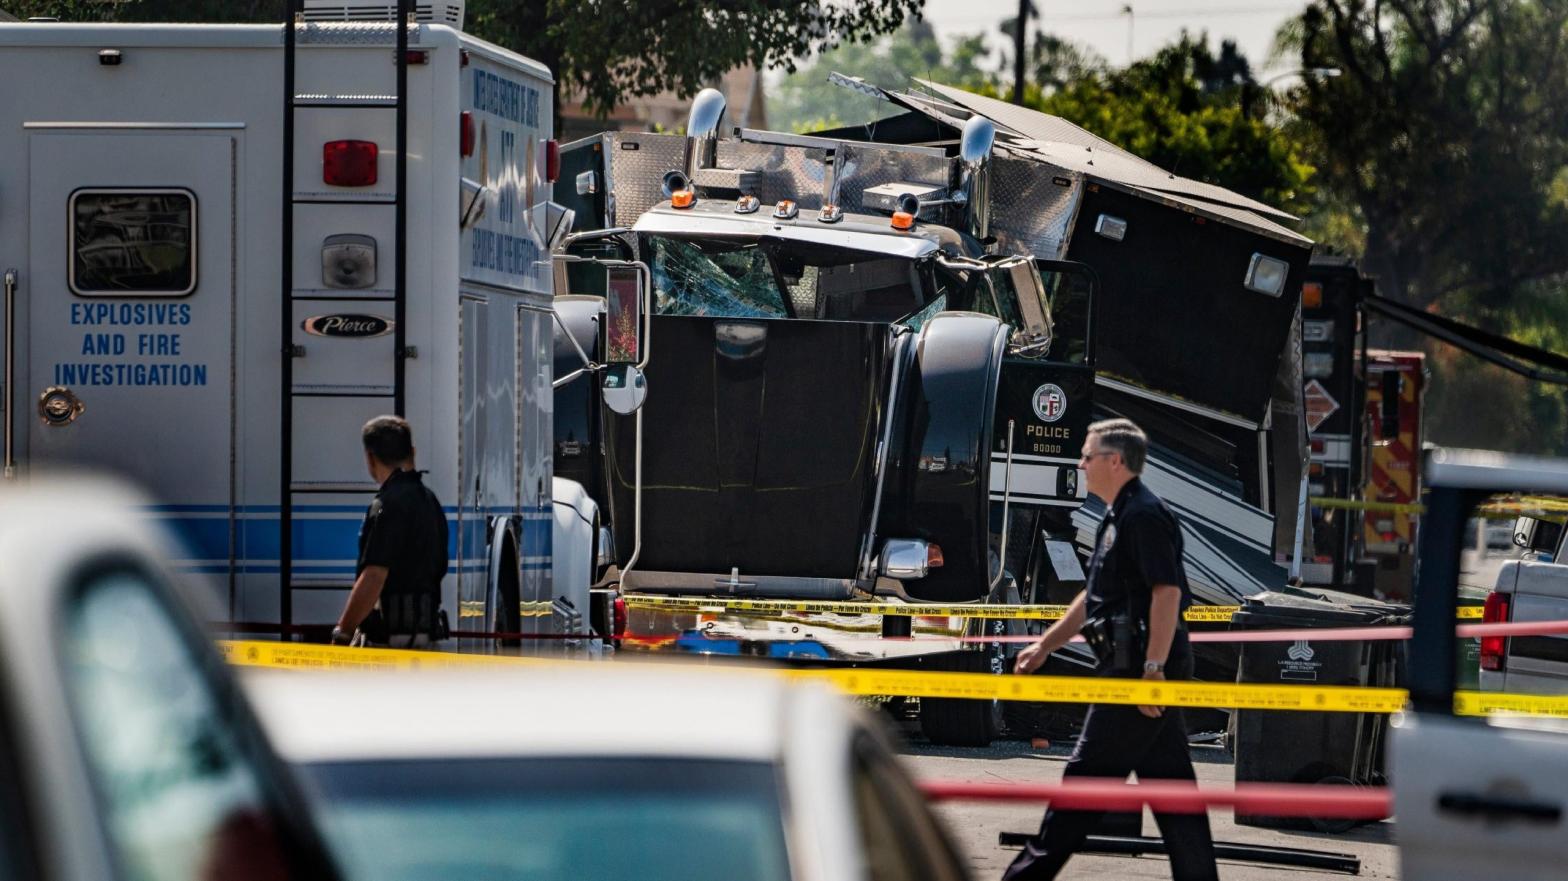 A destroyed LAPD armoured tractor-trailer seen after the agency's questionably competent bomb squad detonated way too many fireworks in a South Los Angeles neighbourhood, seen here on July 1, 2021. (Photo: Damian Dovarganes / File, AP)